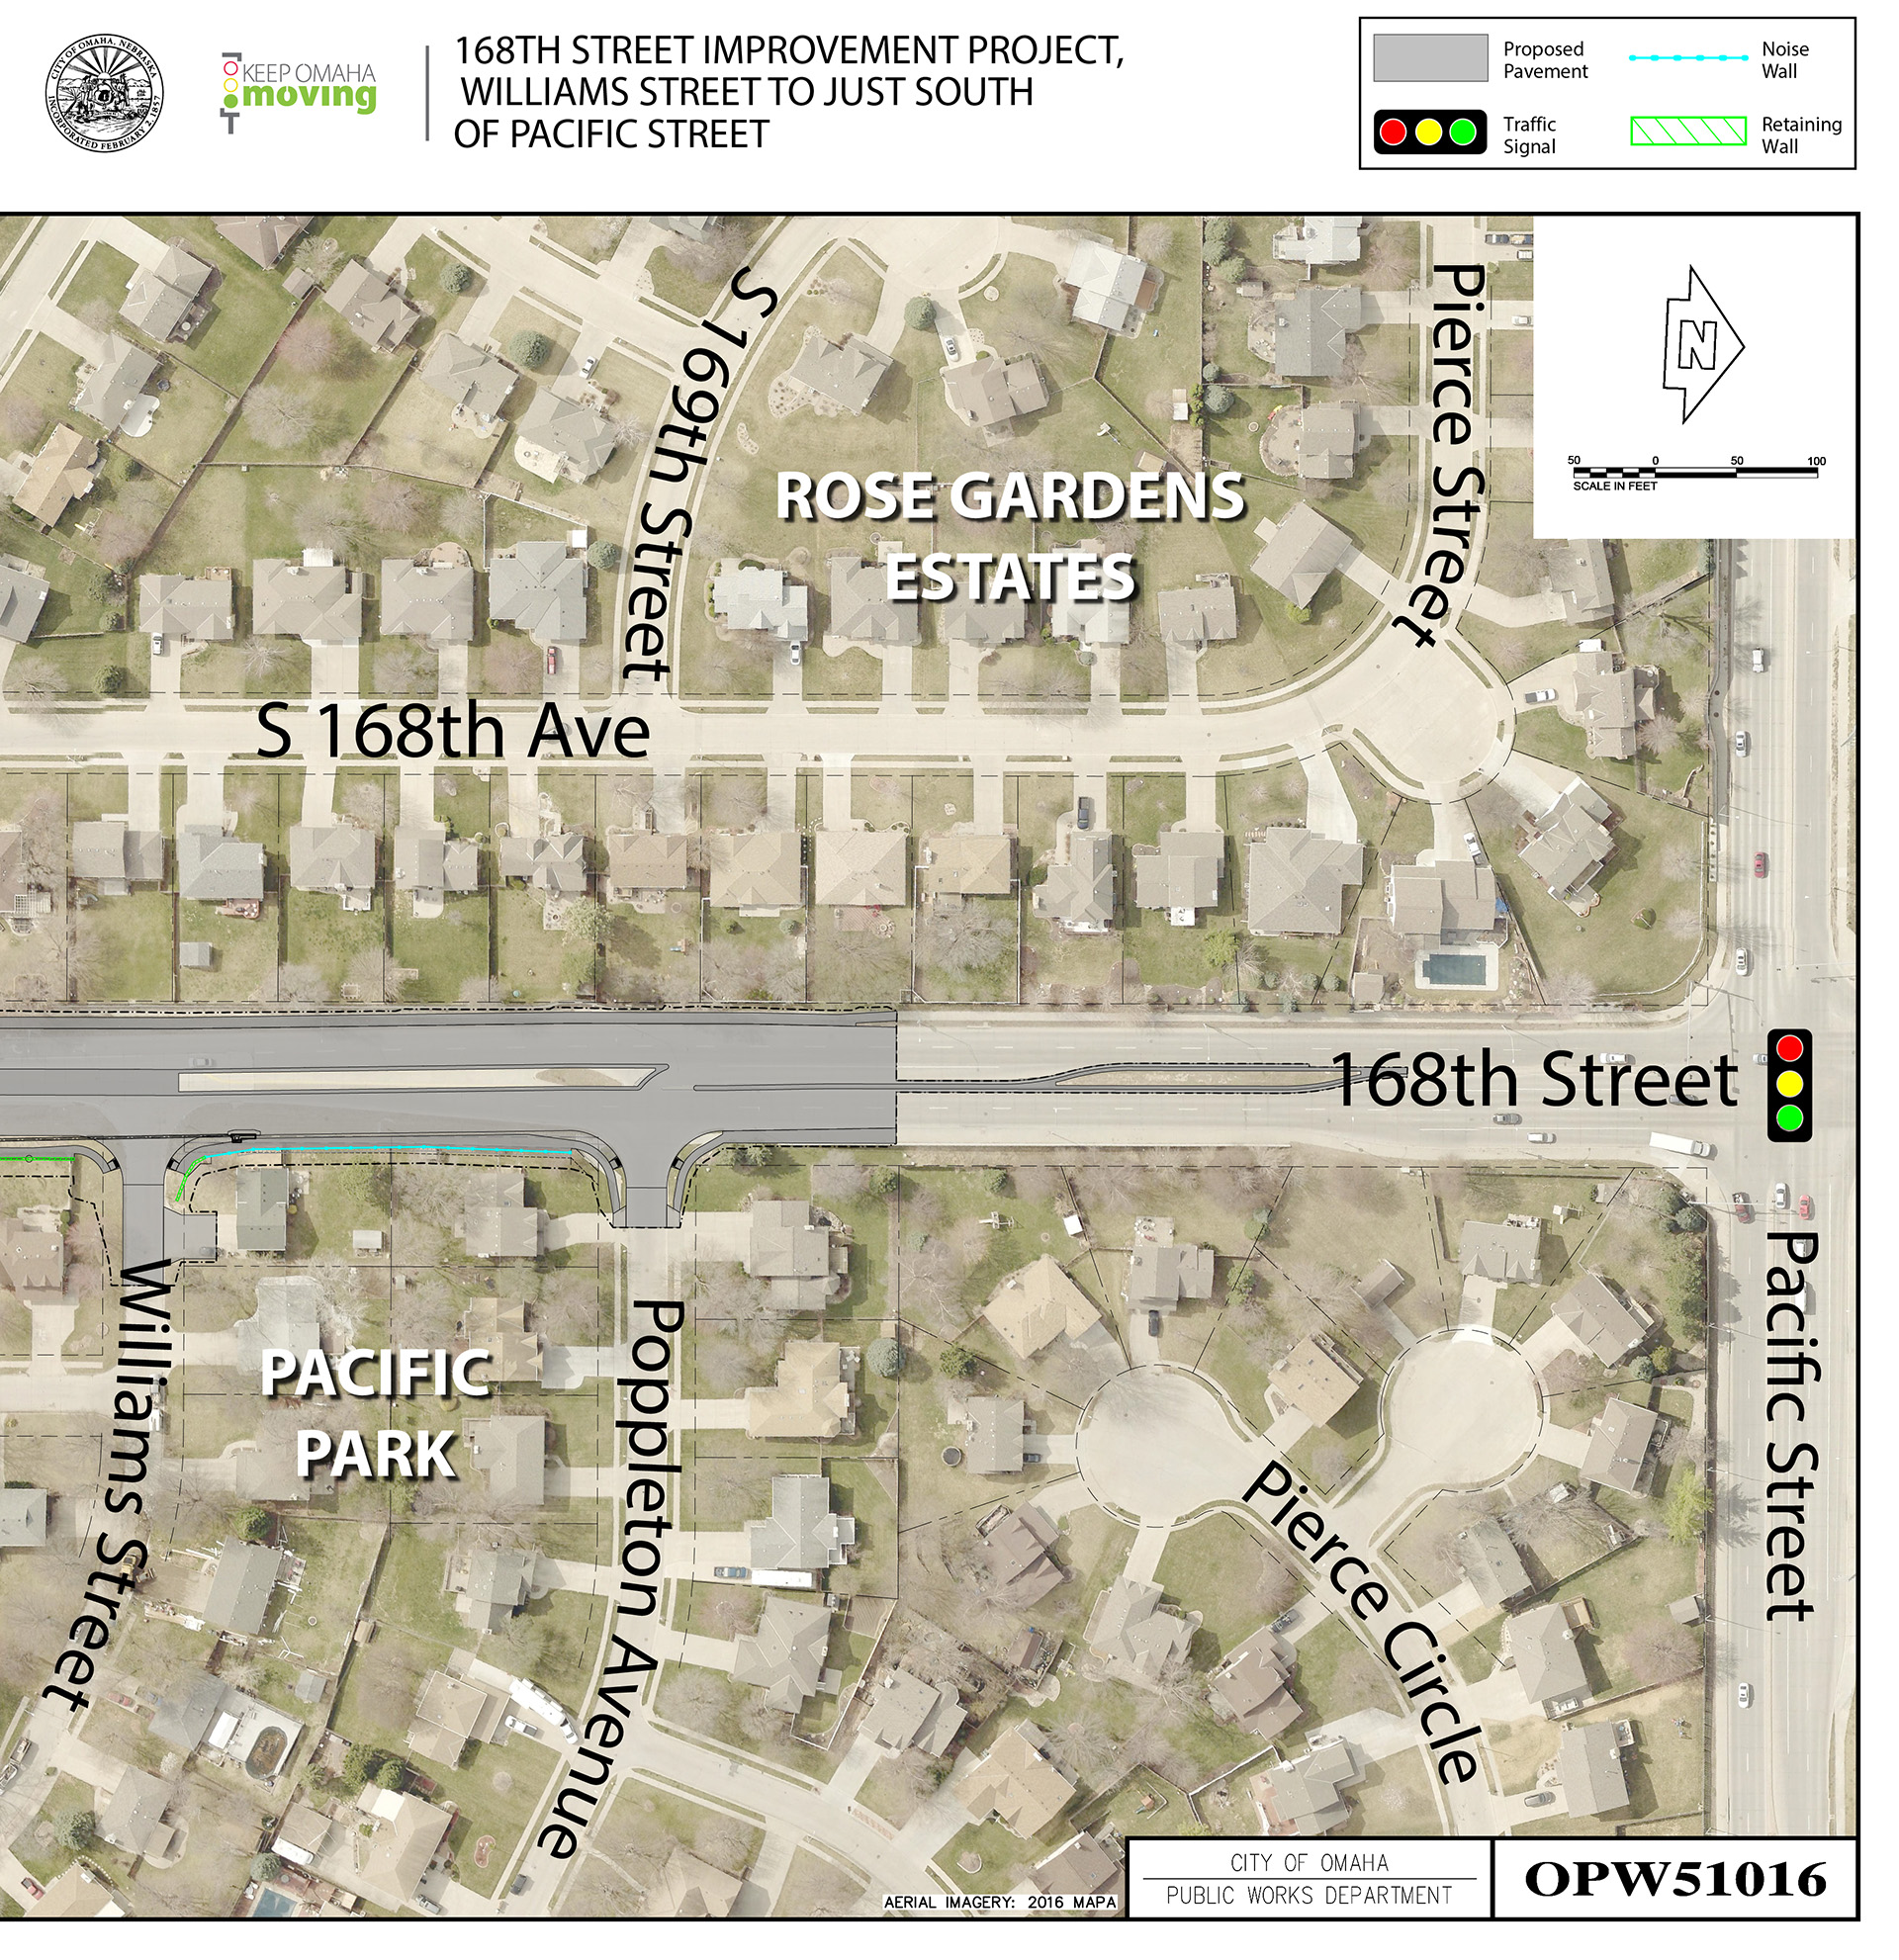 Project Segment: North of William Street (south of Poppleton Ave) to just south of Pacific Street